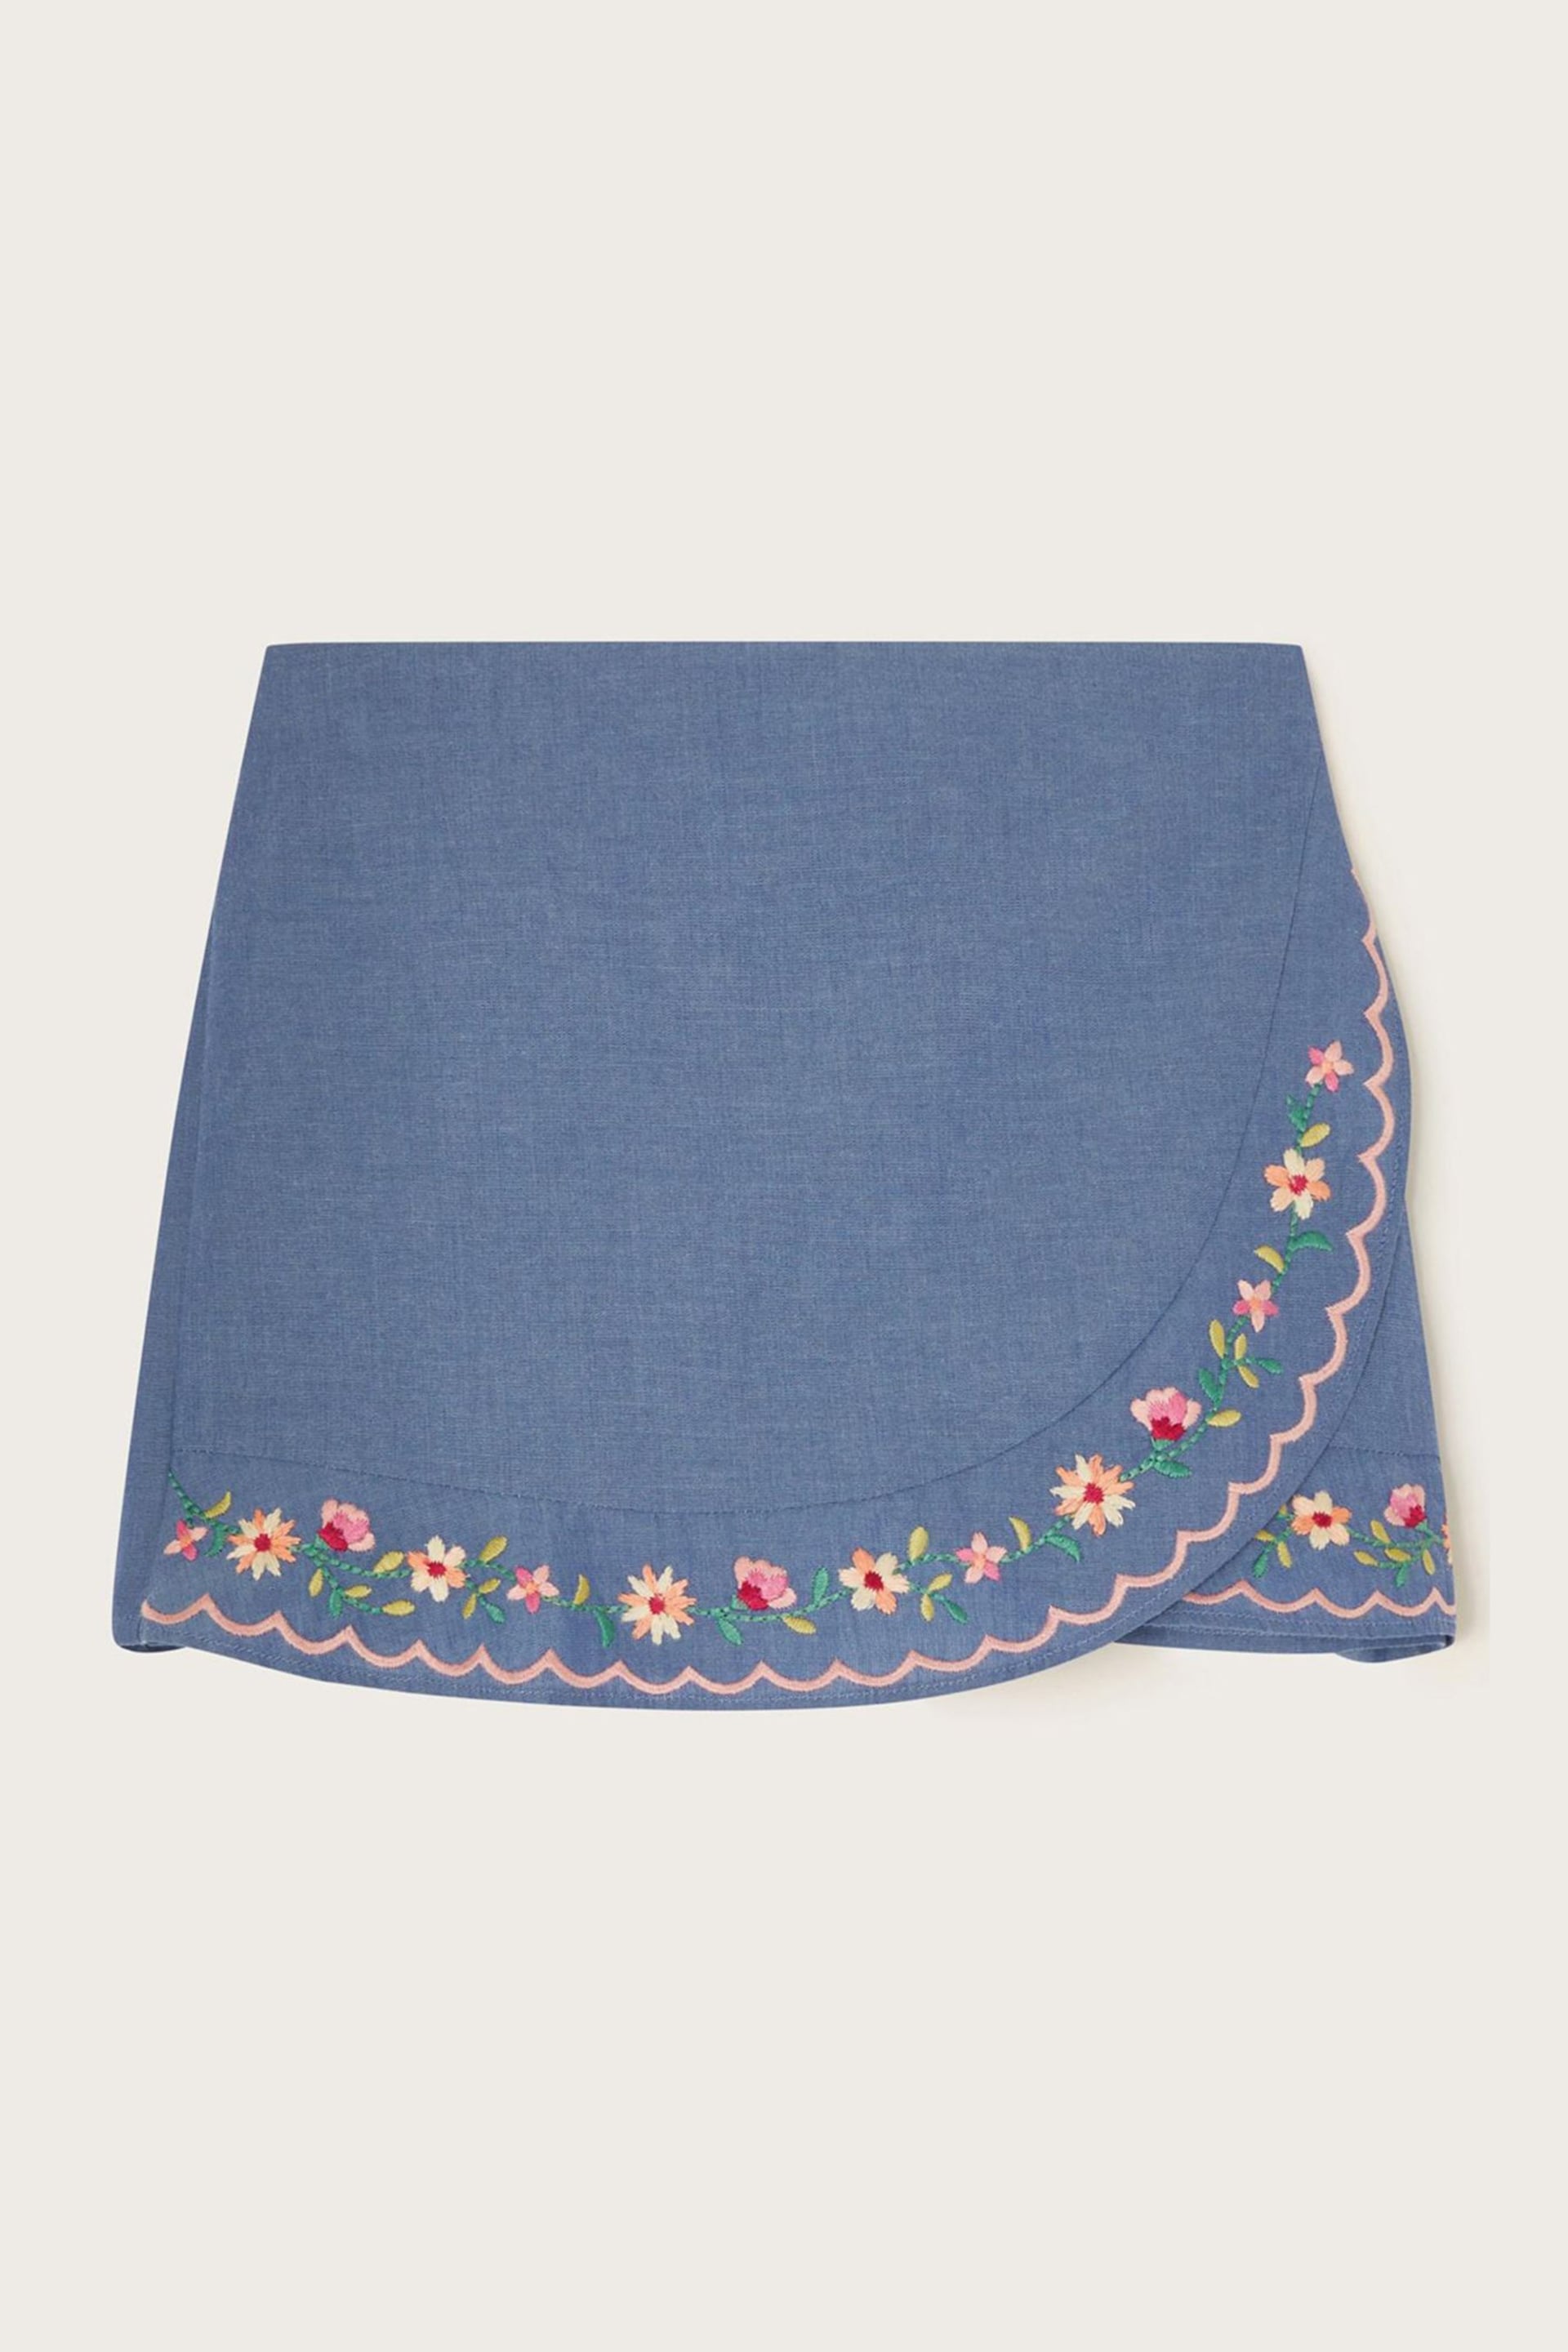 Monsoon Blue Floral Embroidered Chambray Skort - Image 2 of 4